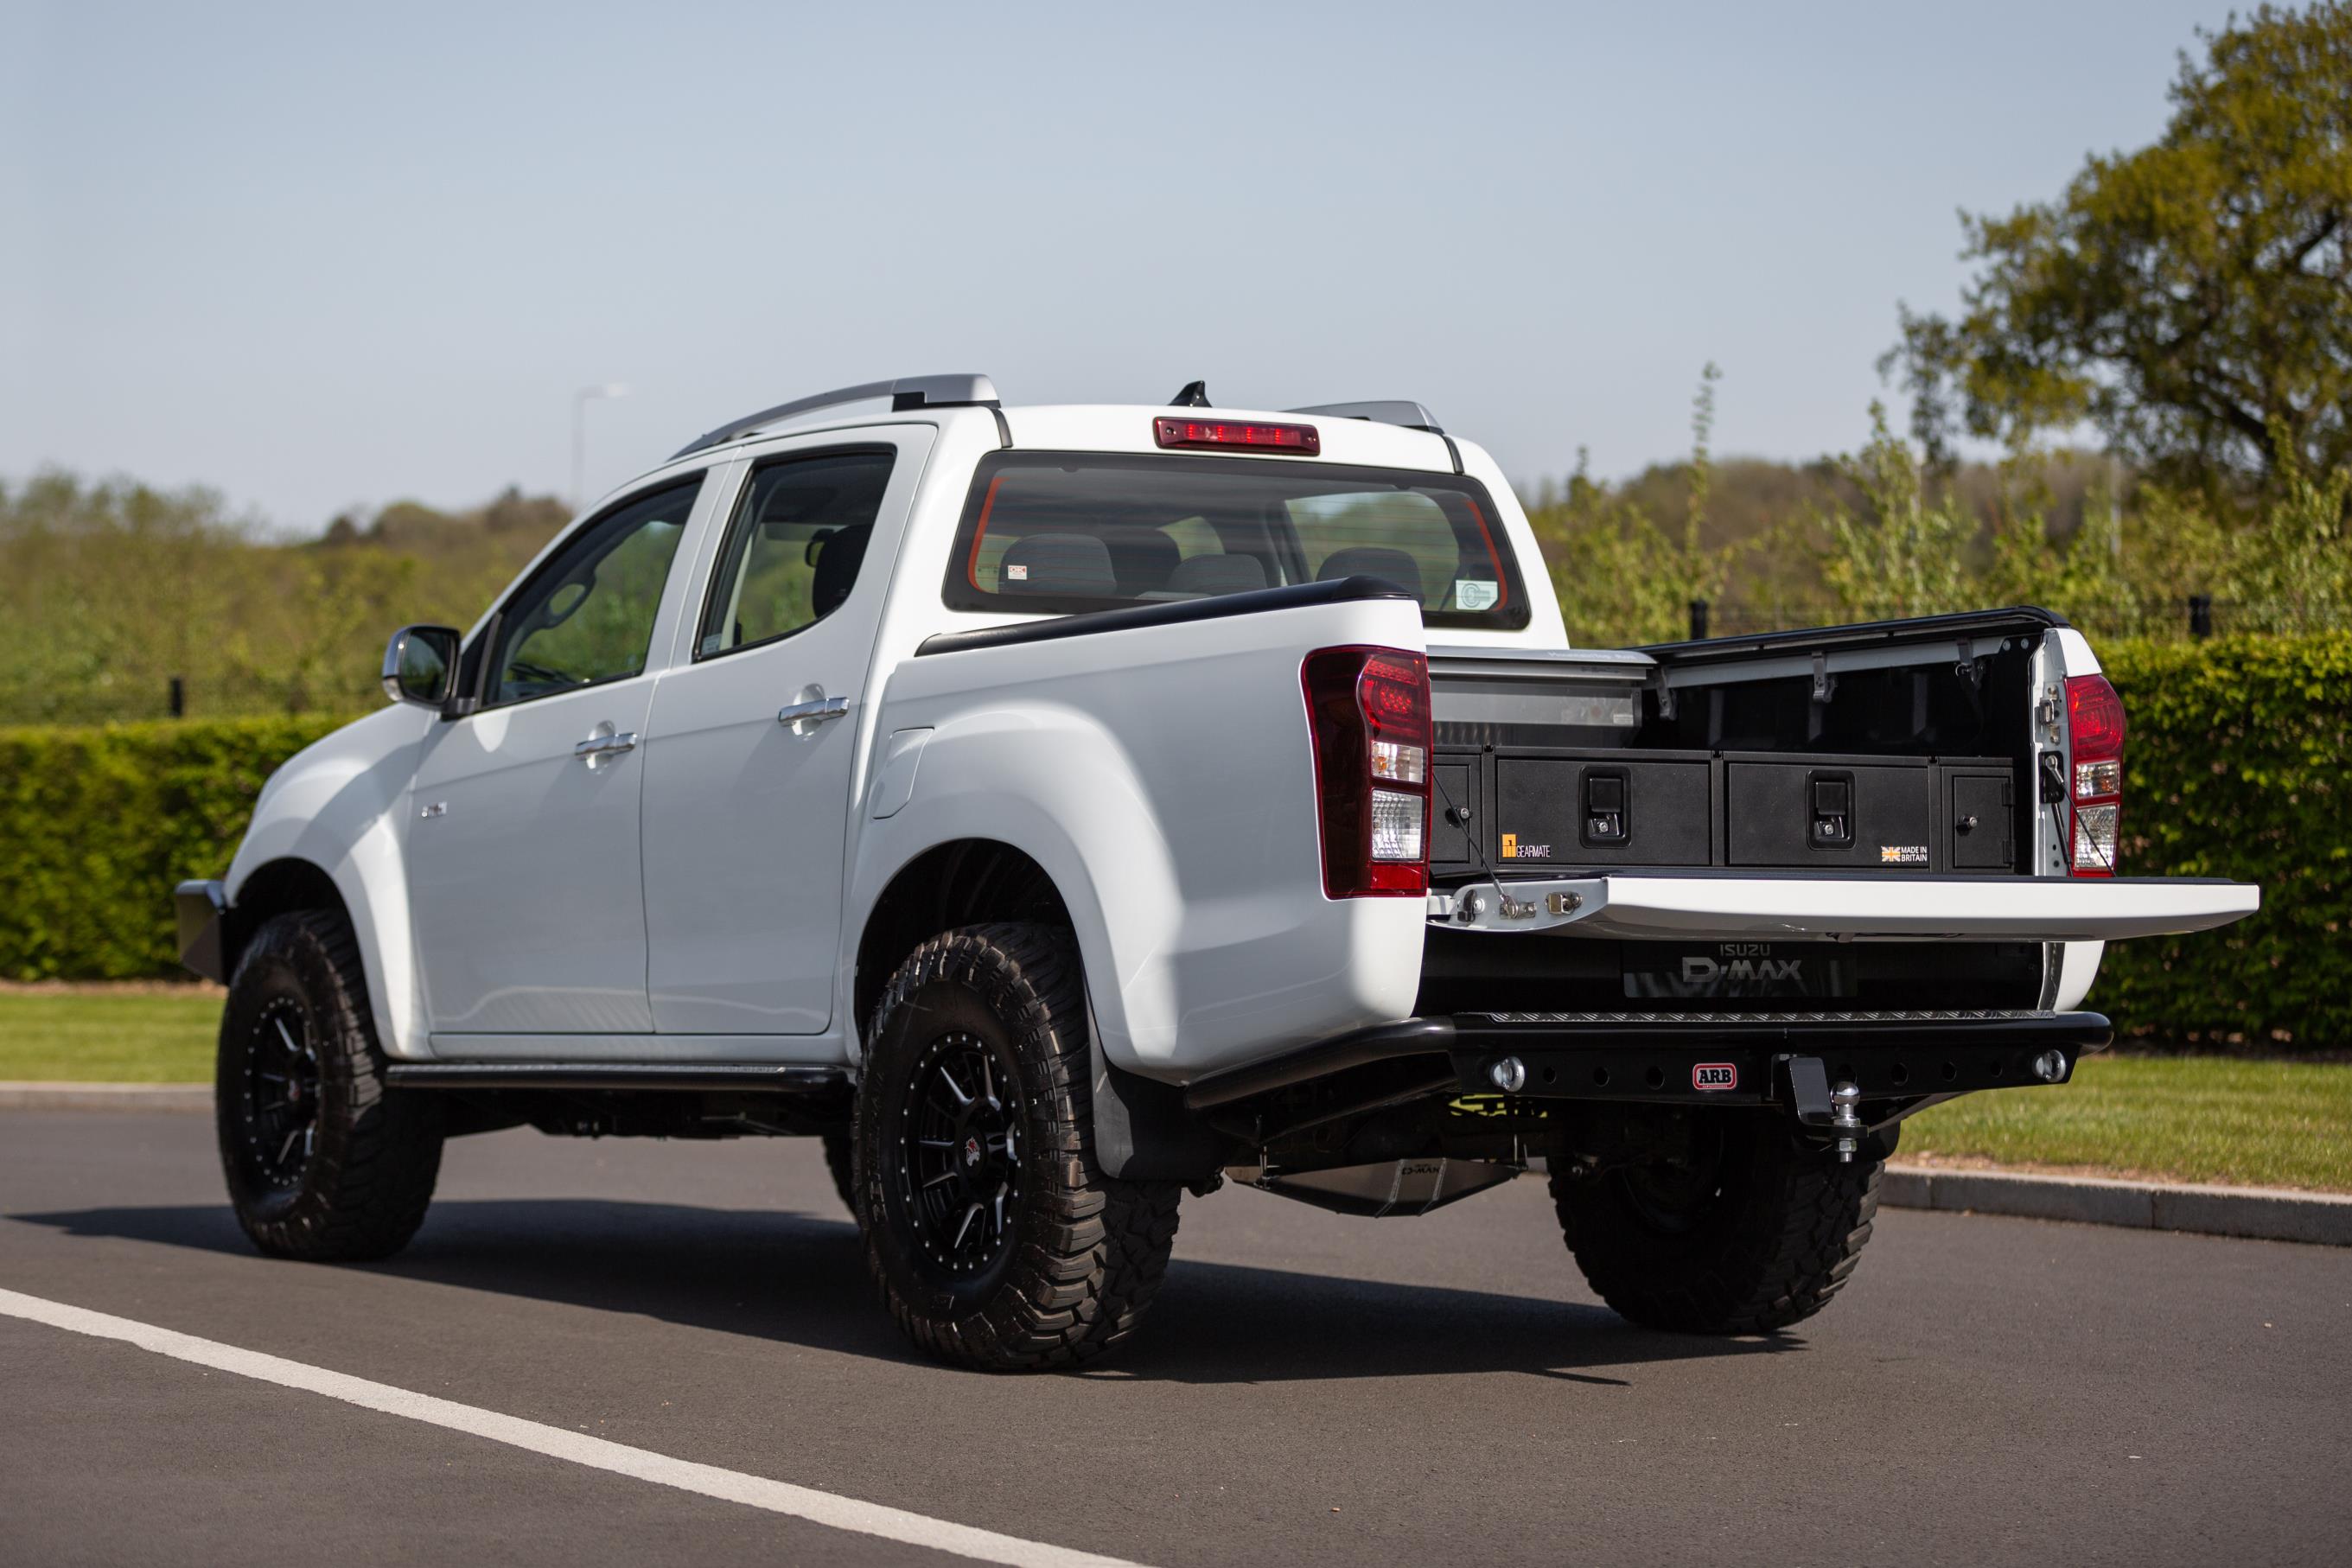 Download Isuzu UK builds one-off D-Max GO2 extreme off-roader - Leisure Wheels